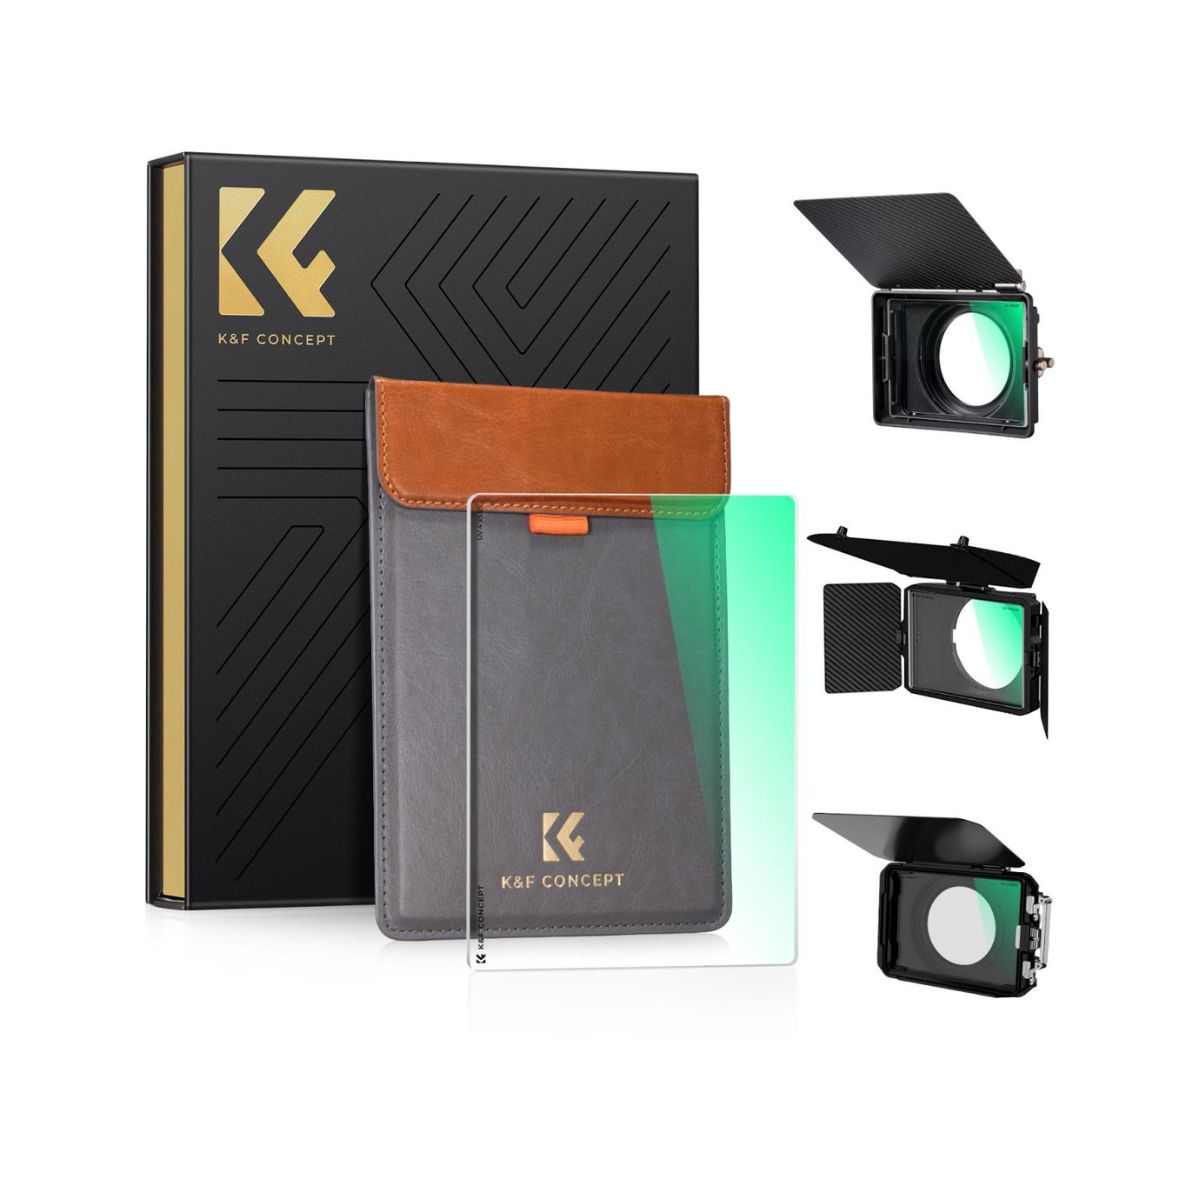 K&F Concept 4 x 5.65" Matte Box Cinema Camera Square Filter with Protective Leather Carry Storage Pouch - Choose from Black Mist 1/4, Black Mist 1/8, Blue Streak, MCUV, ND64, ND32, ND16, ND8